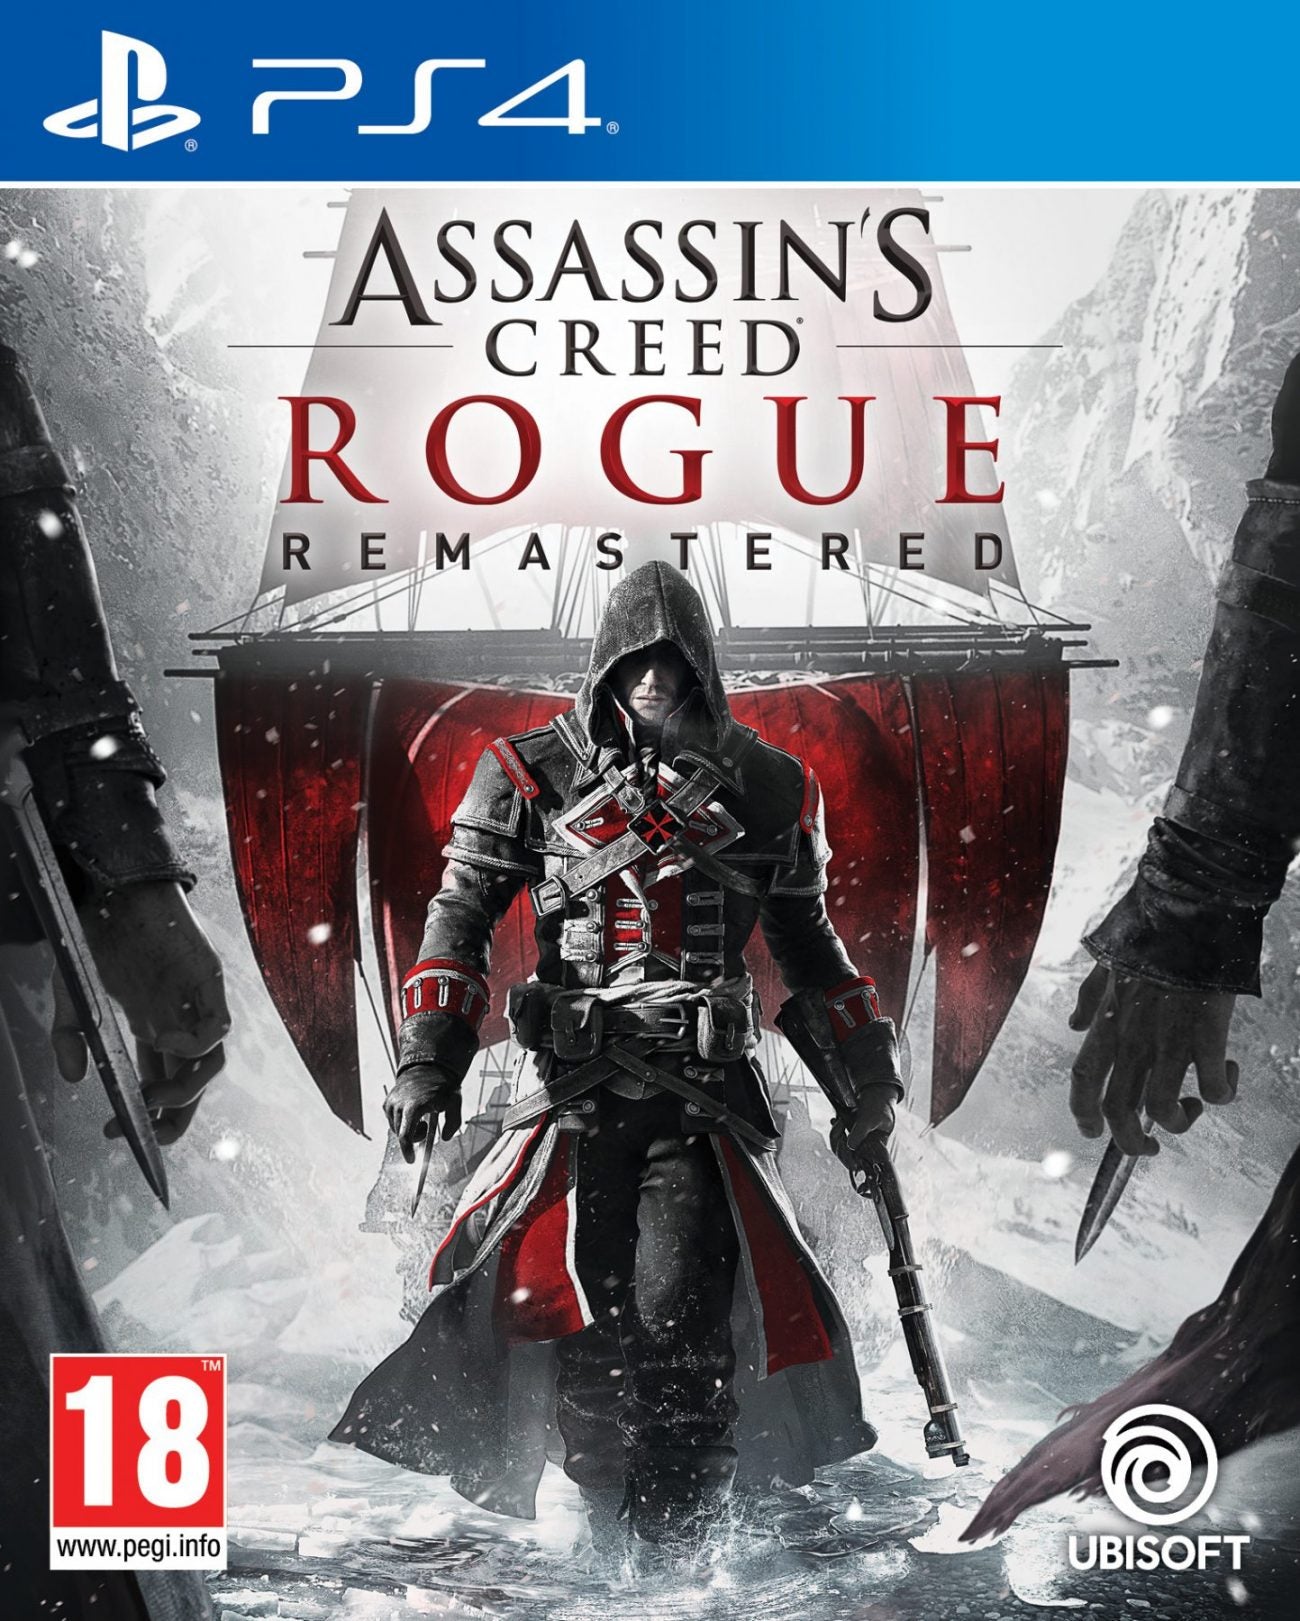 ASSASSIN'S CREED ROGUE (REMASTERED)